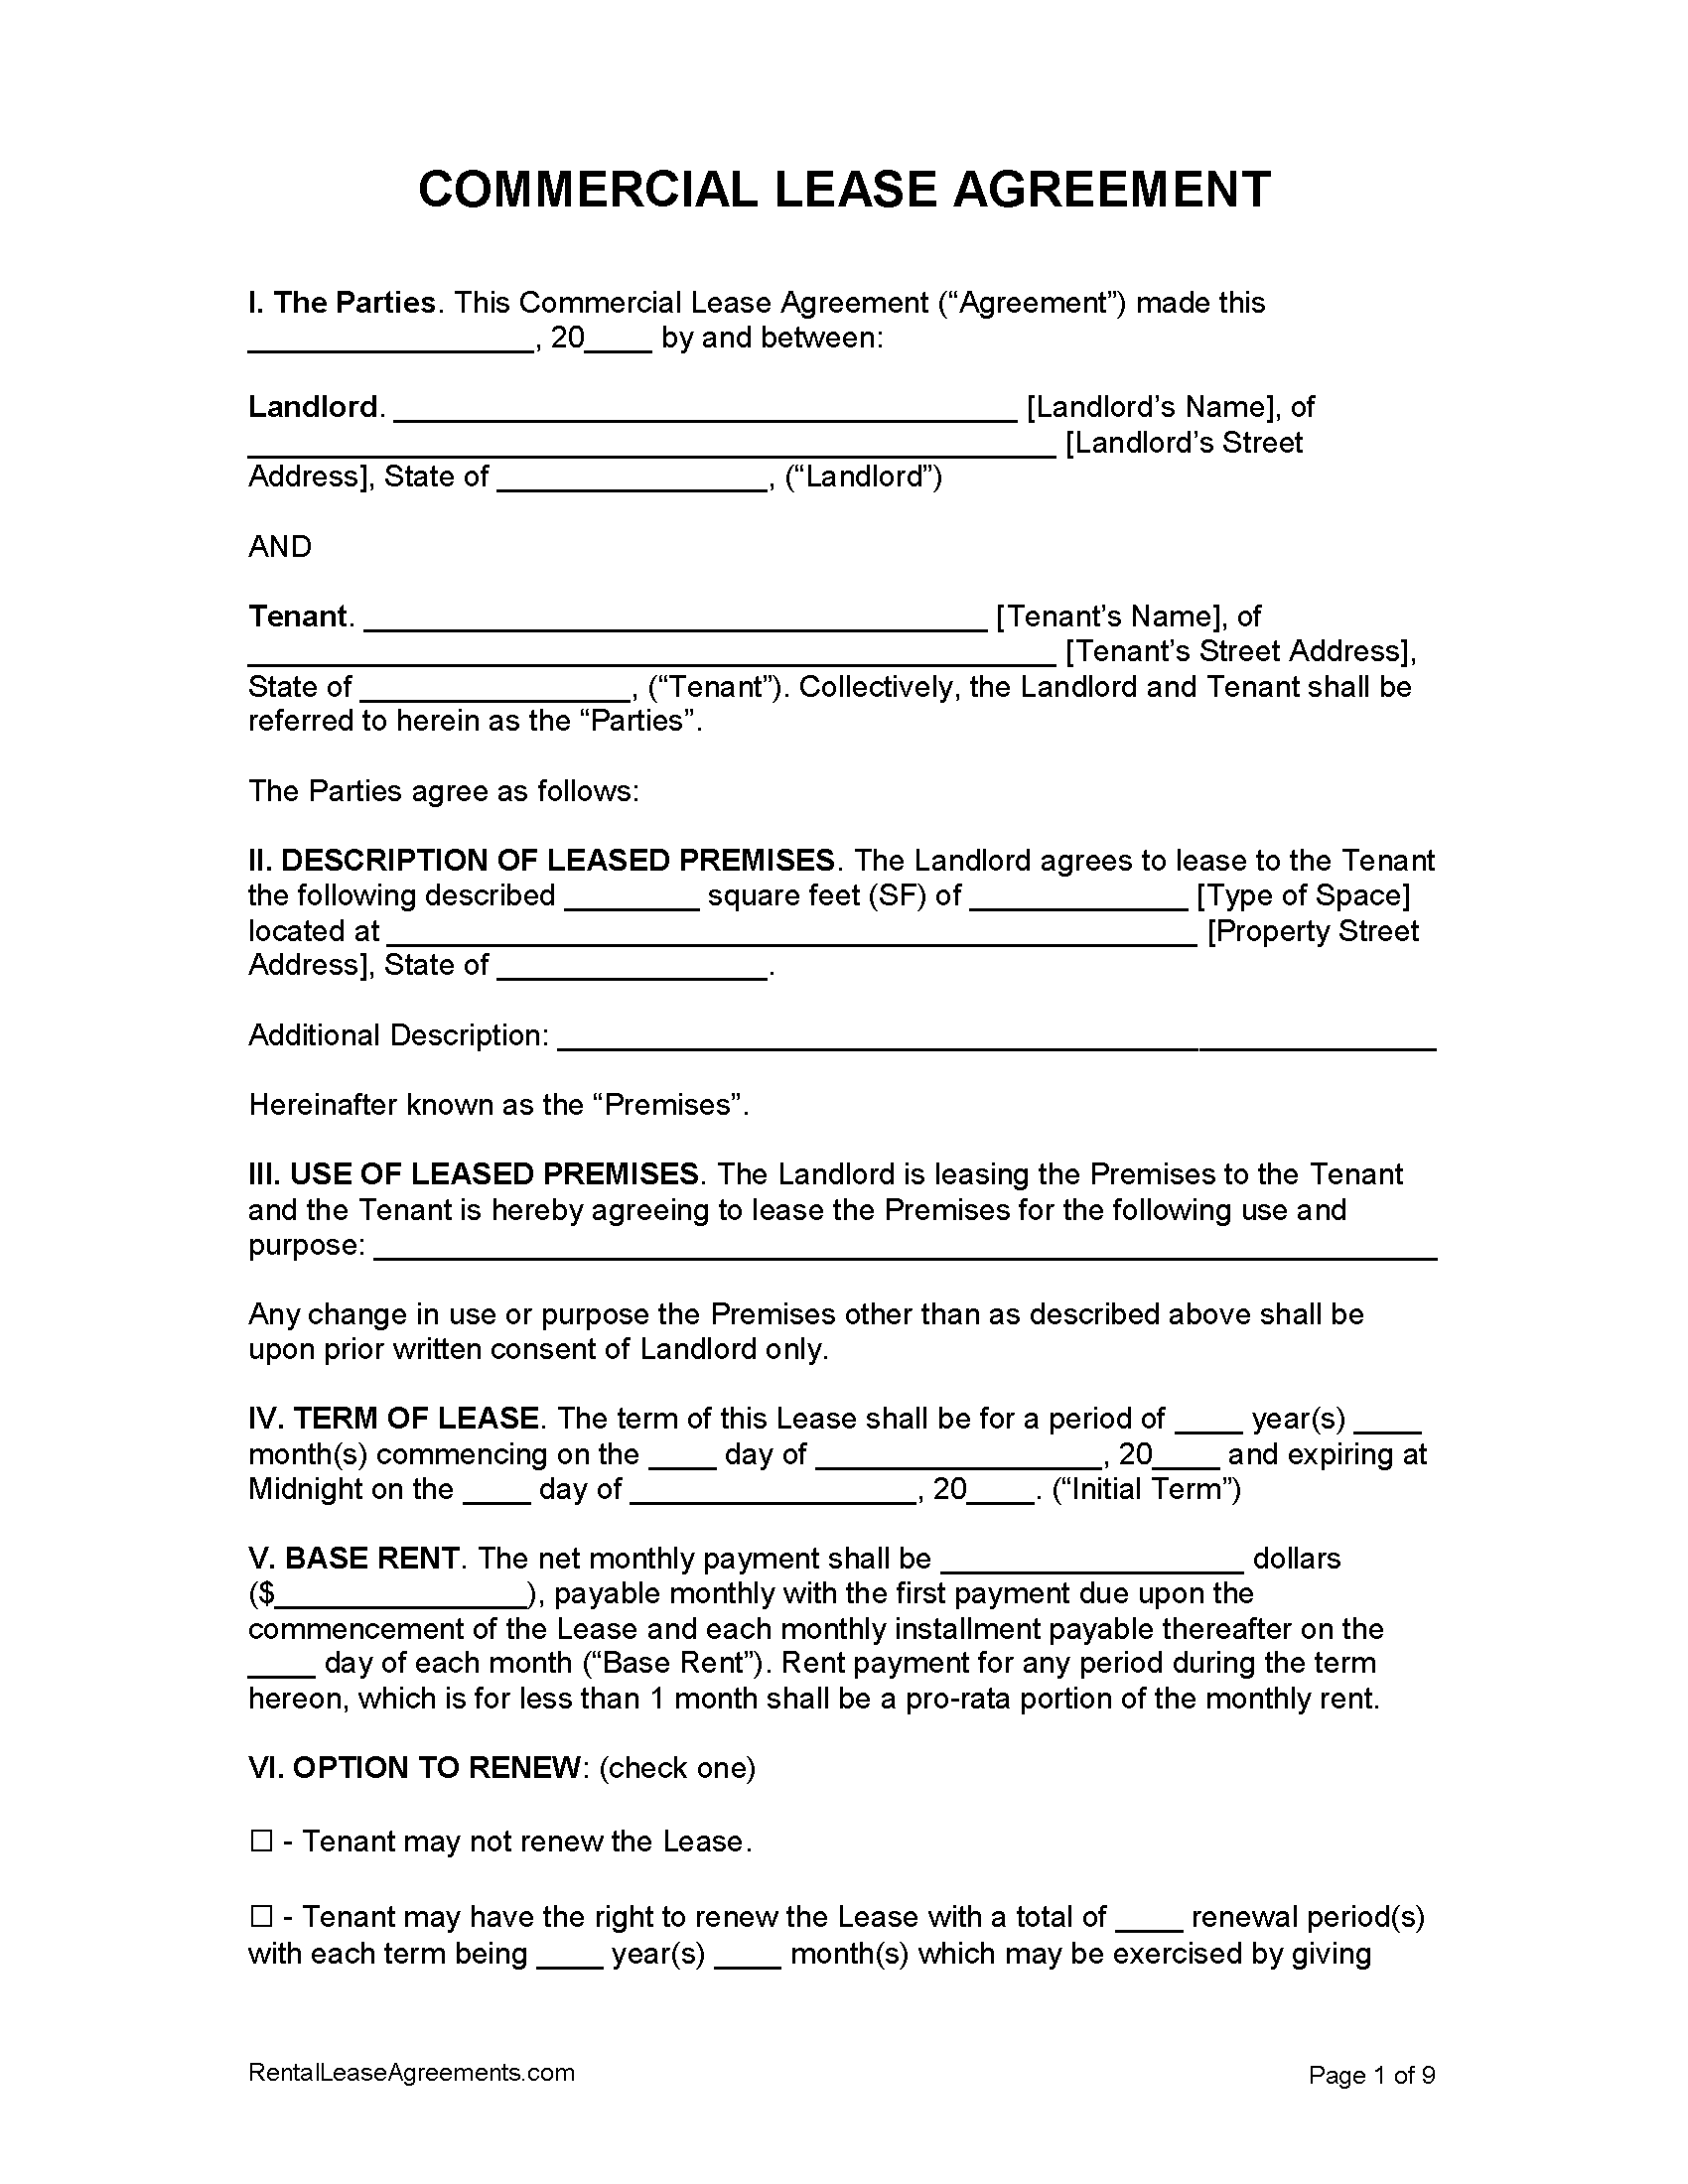 Free Commercial Lease Agreement Template  PDF - Word Inside commercial lease agreement template word